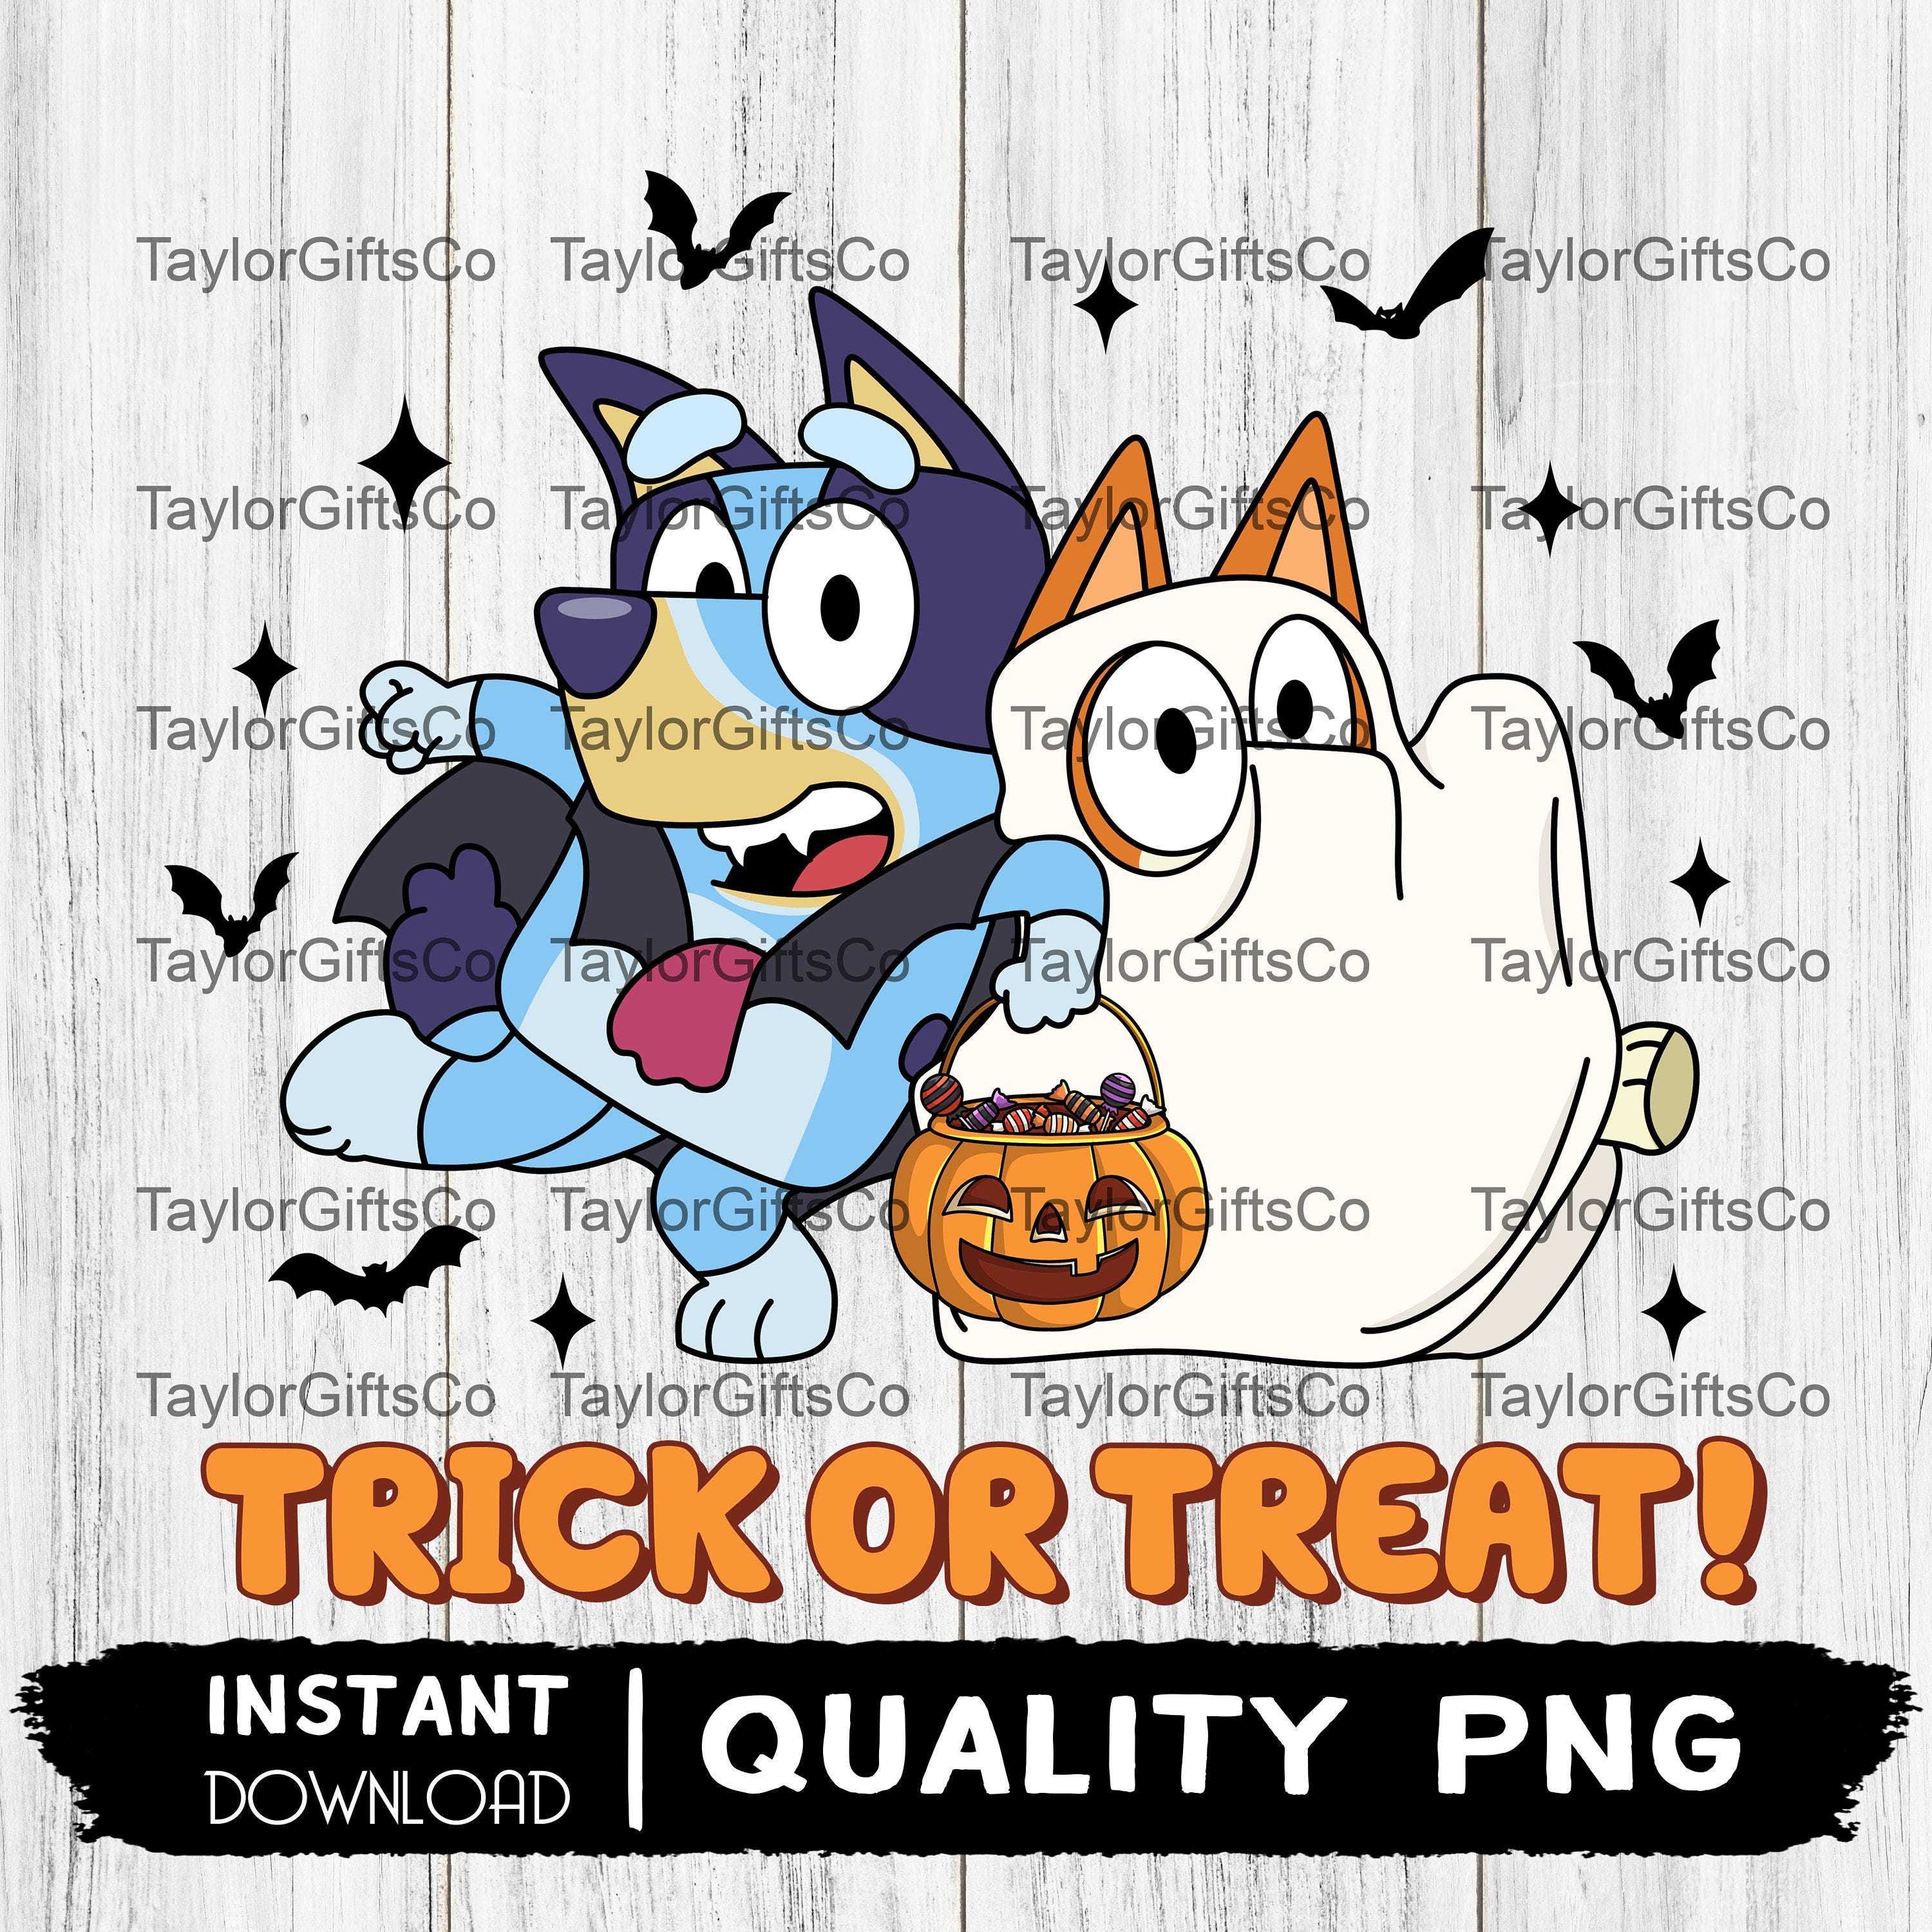 Blue Dog And Bin Dog File Png, Halloween File Png, Spooky Season Png, Blue Dog Png, Halloween Png, Trick or Treat, Halloween Gift For Her!